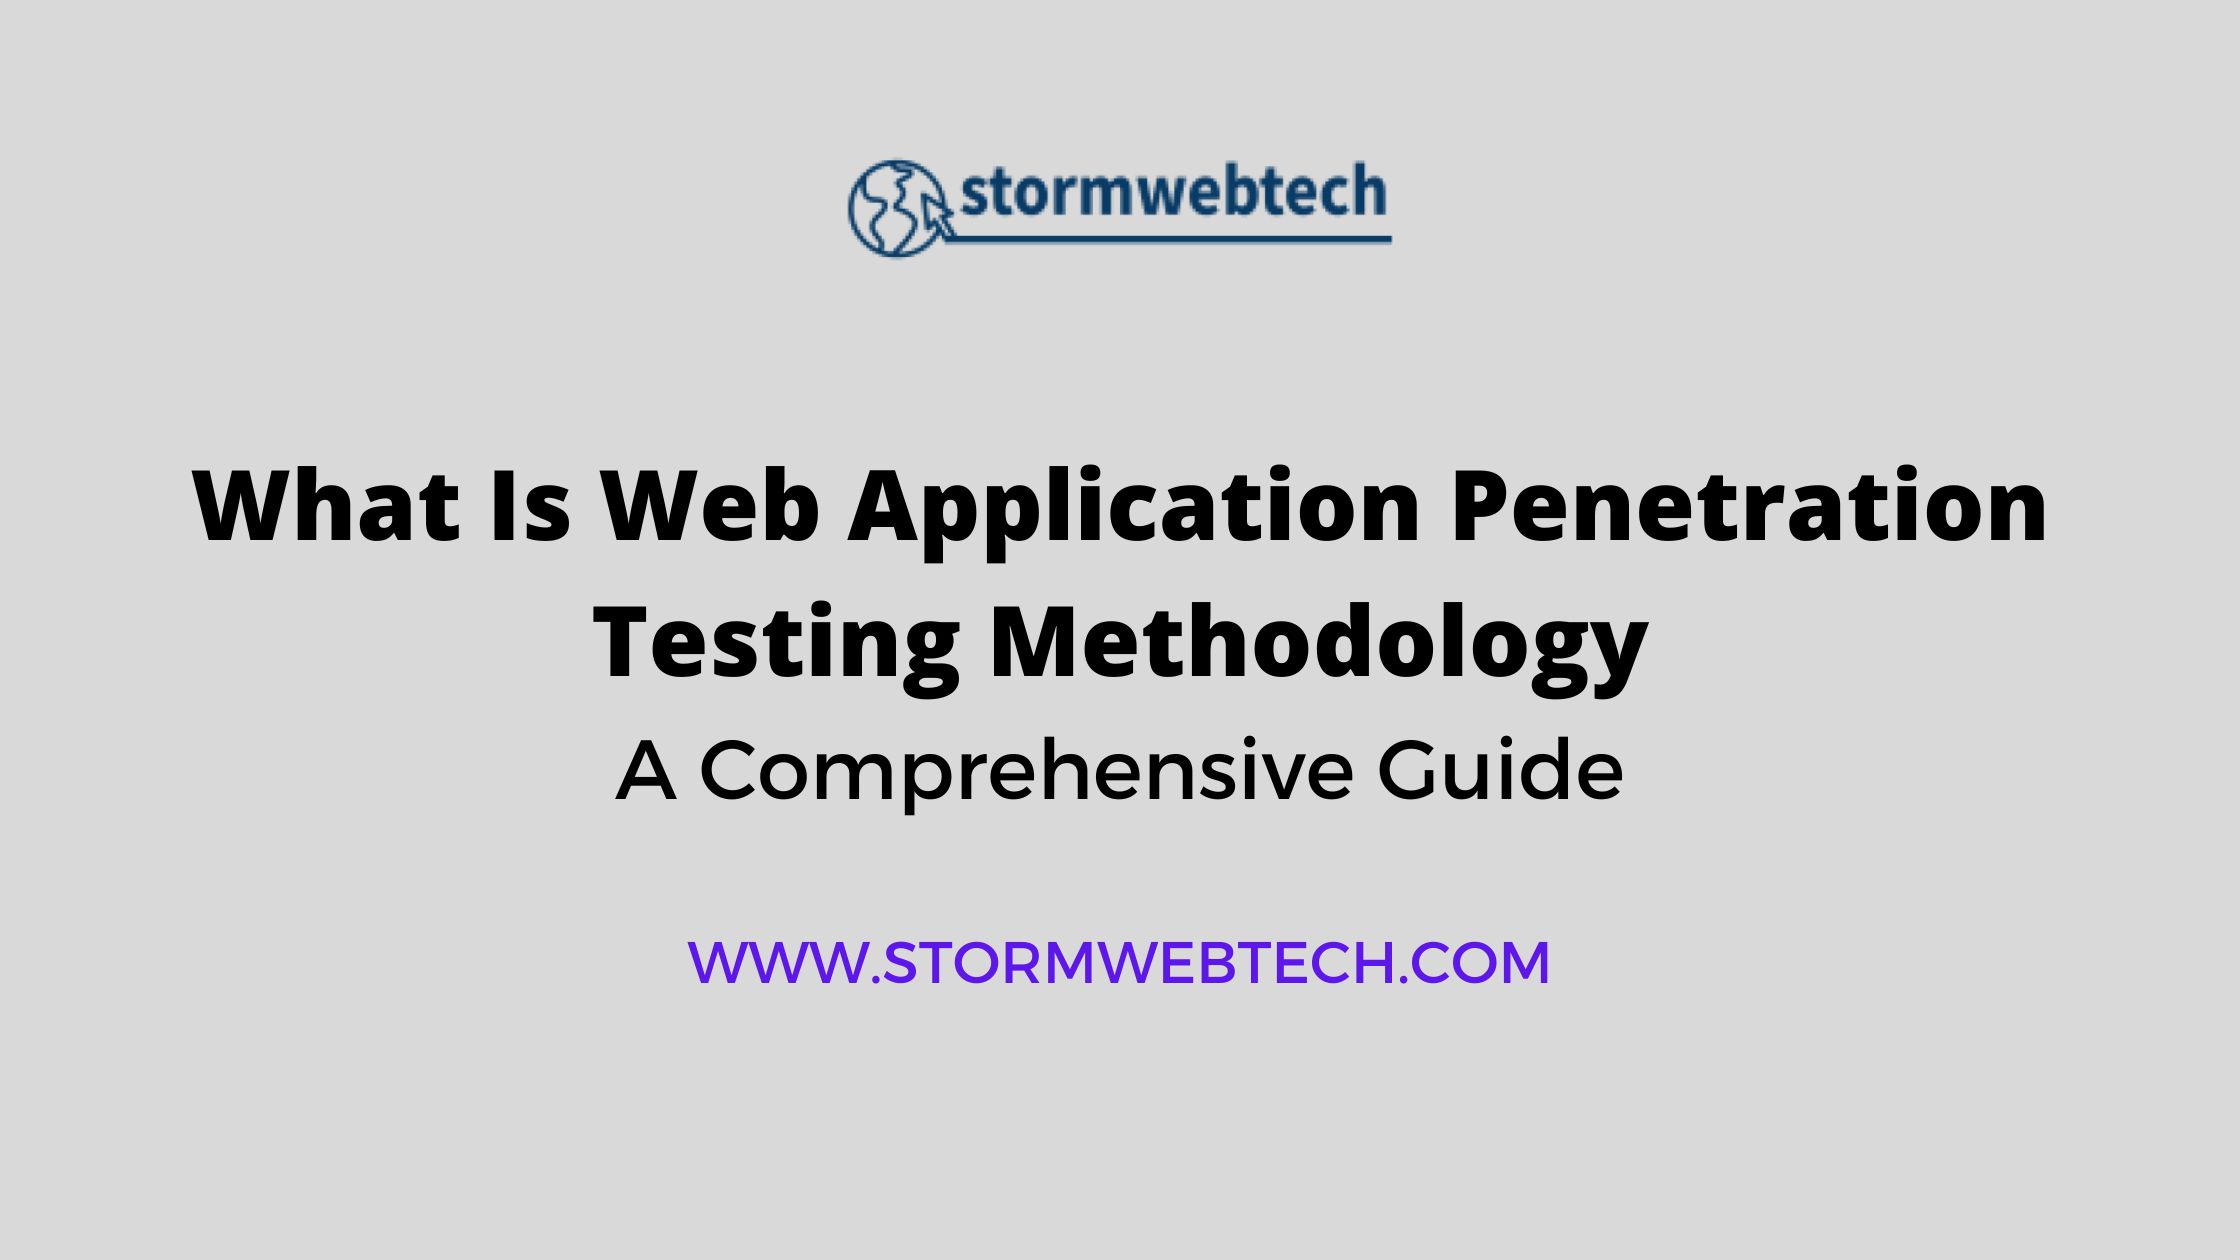 web application penetration testing methodology, exploring the steps and best practices to conduct a thorough assessment of applications' security